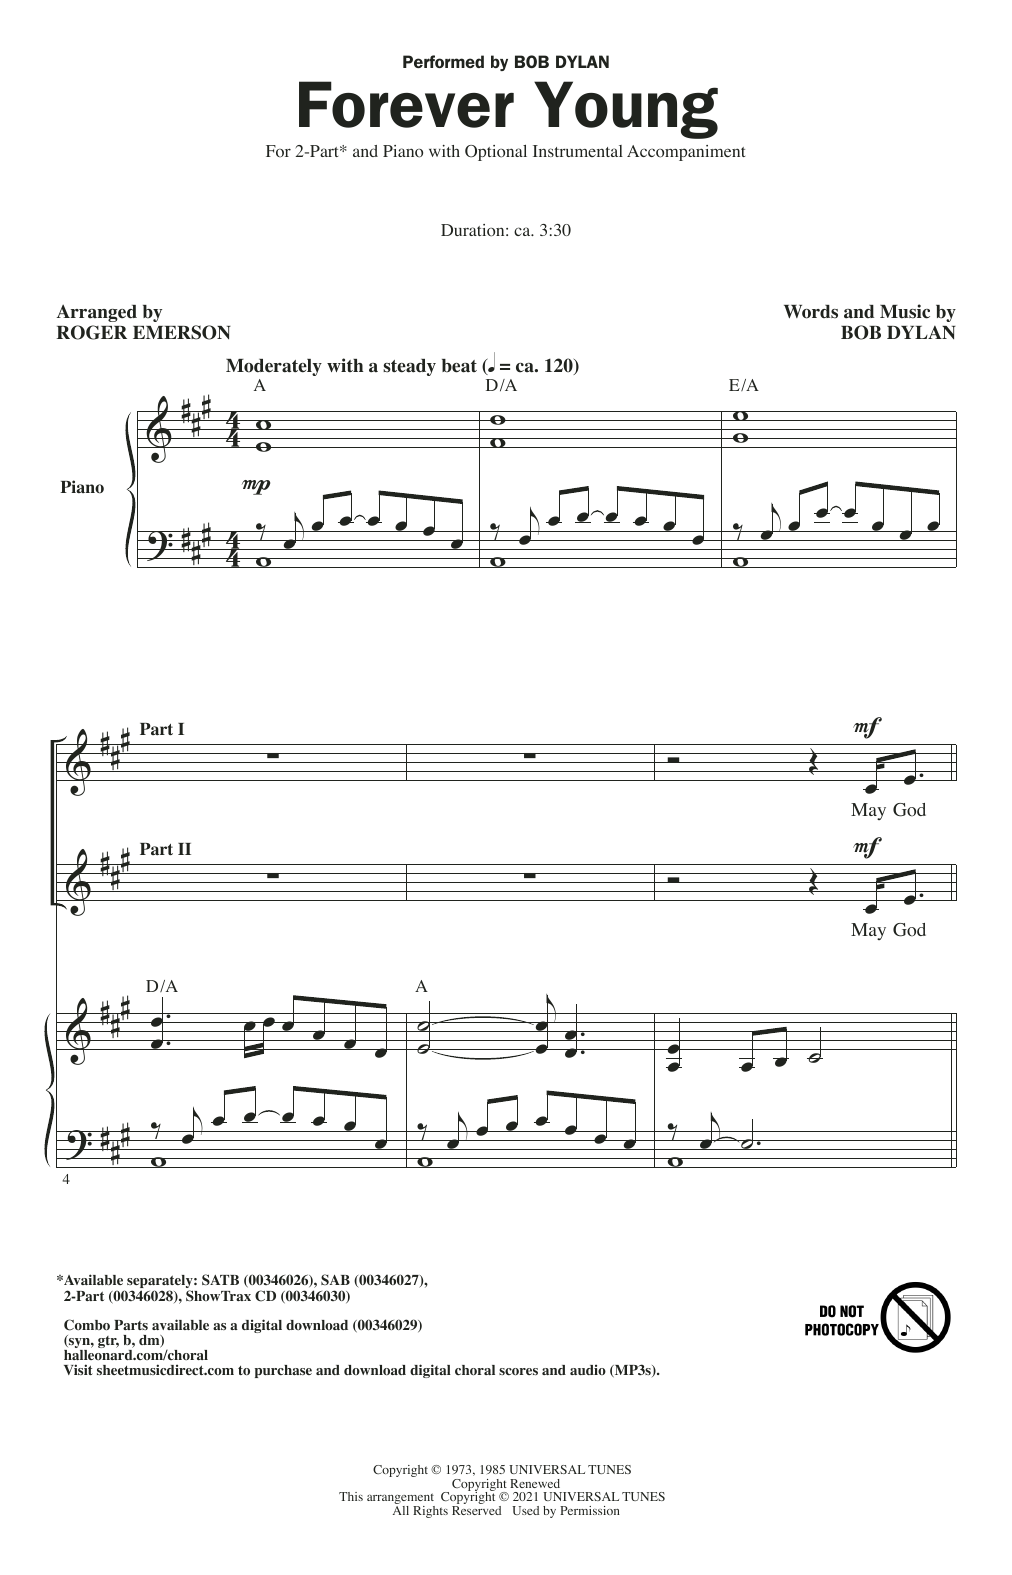 Bob Dylan Forever Young (arr. Roger Emerson) sheet music notes and chords. Download Printable PDF.